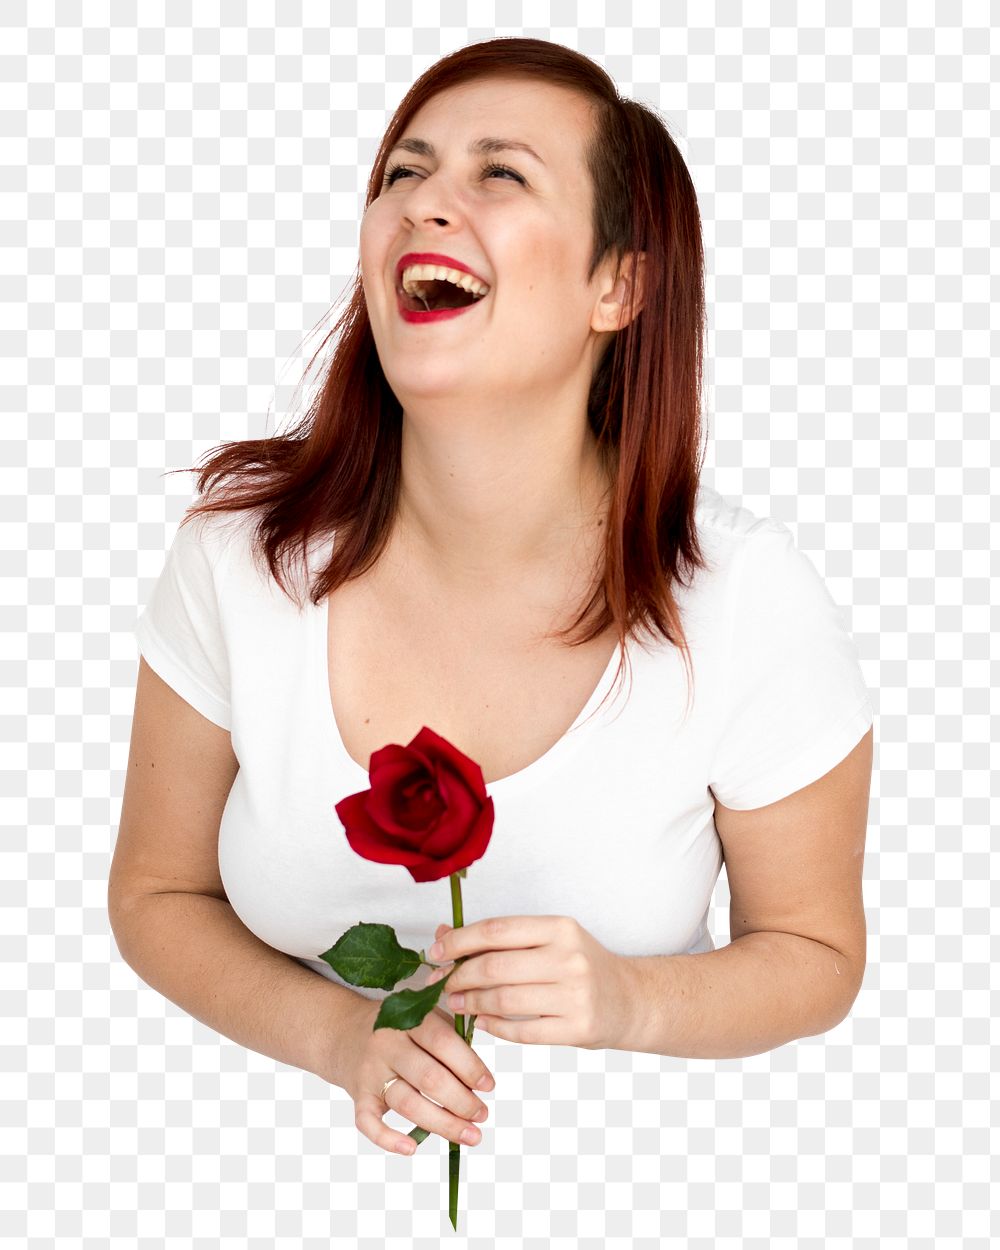 Woman holding rose png, transparent background